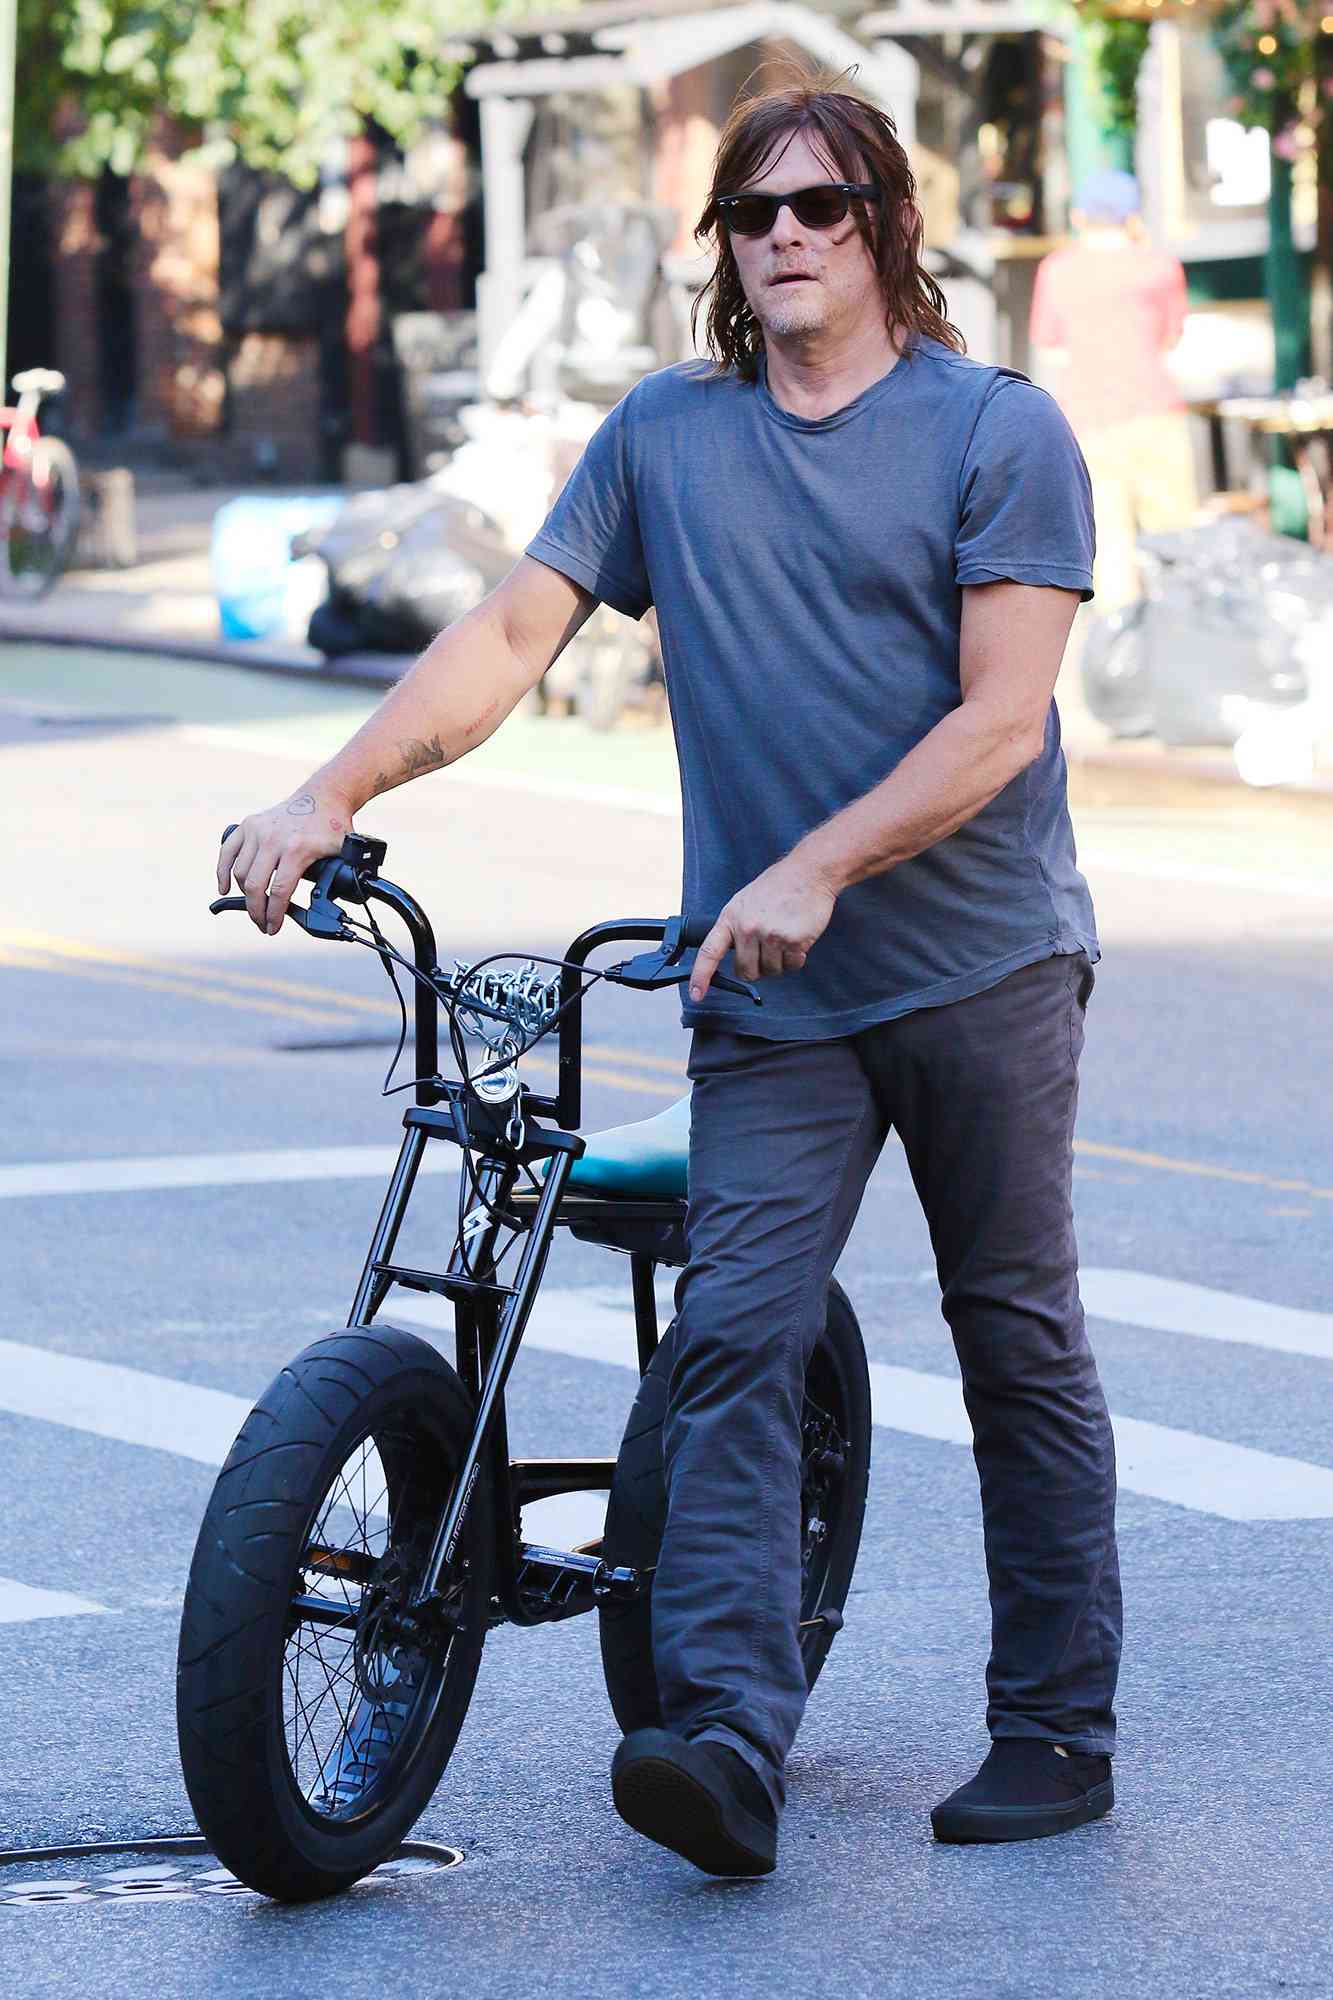 Norman Reedus walks home after a bike ride in Manhattan’s Downtown area